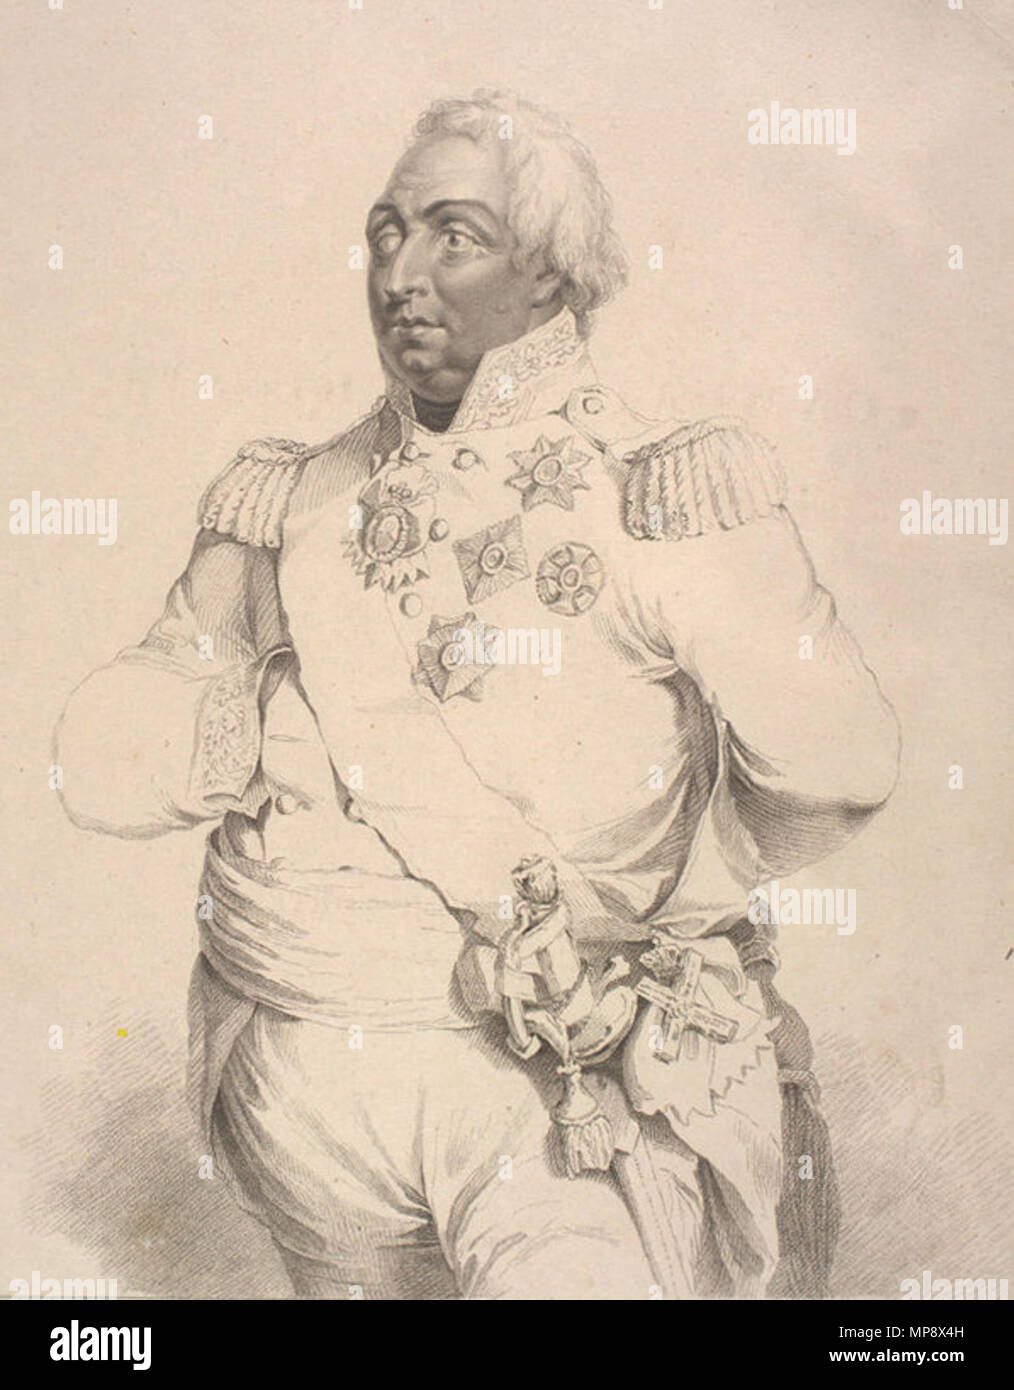 . Russian Field Marshal Mikhail Kutuzov, Prince of Smolensk (1745-1813). Engraved by Hopwood, from an original drawing . 1813. Engraved by Hopwood 779 Kutuzov by Hopwood Stock Photo